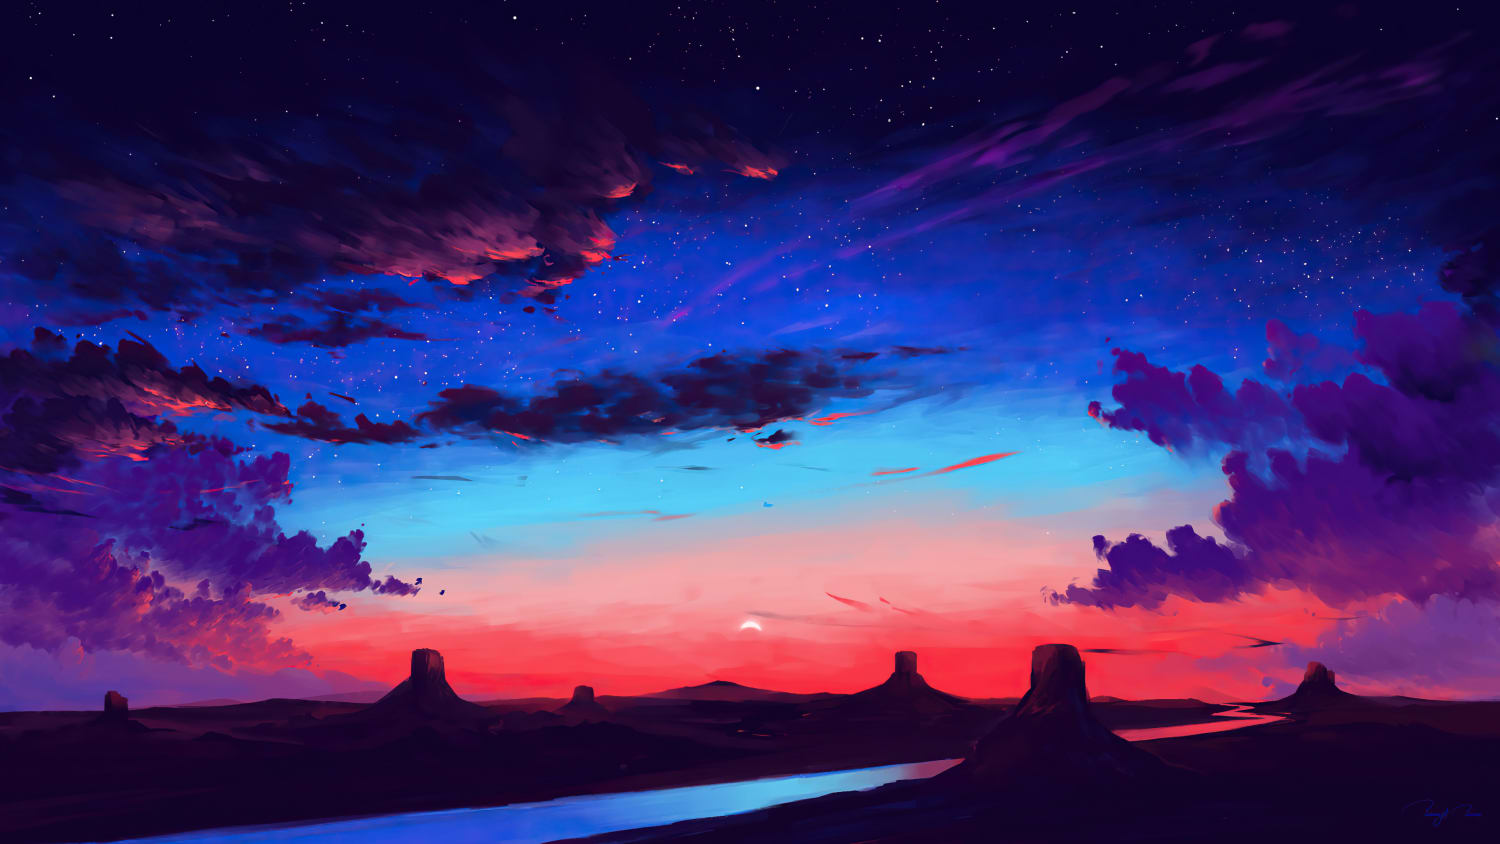 Sunset on a desert with a starry sky